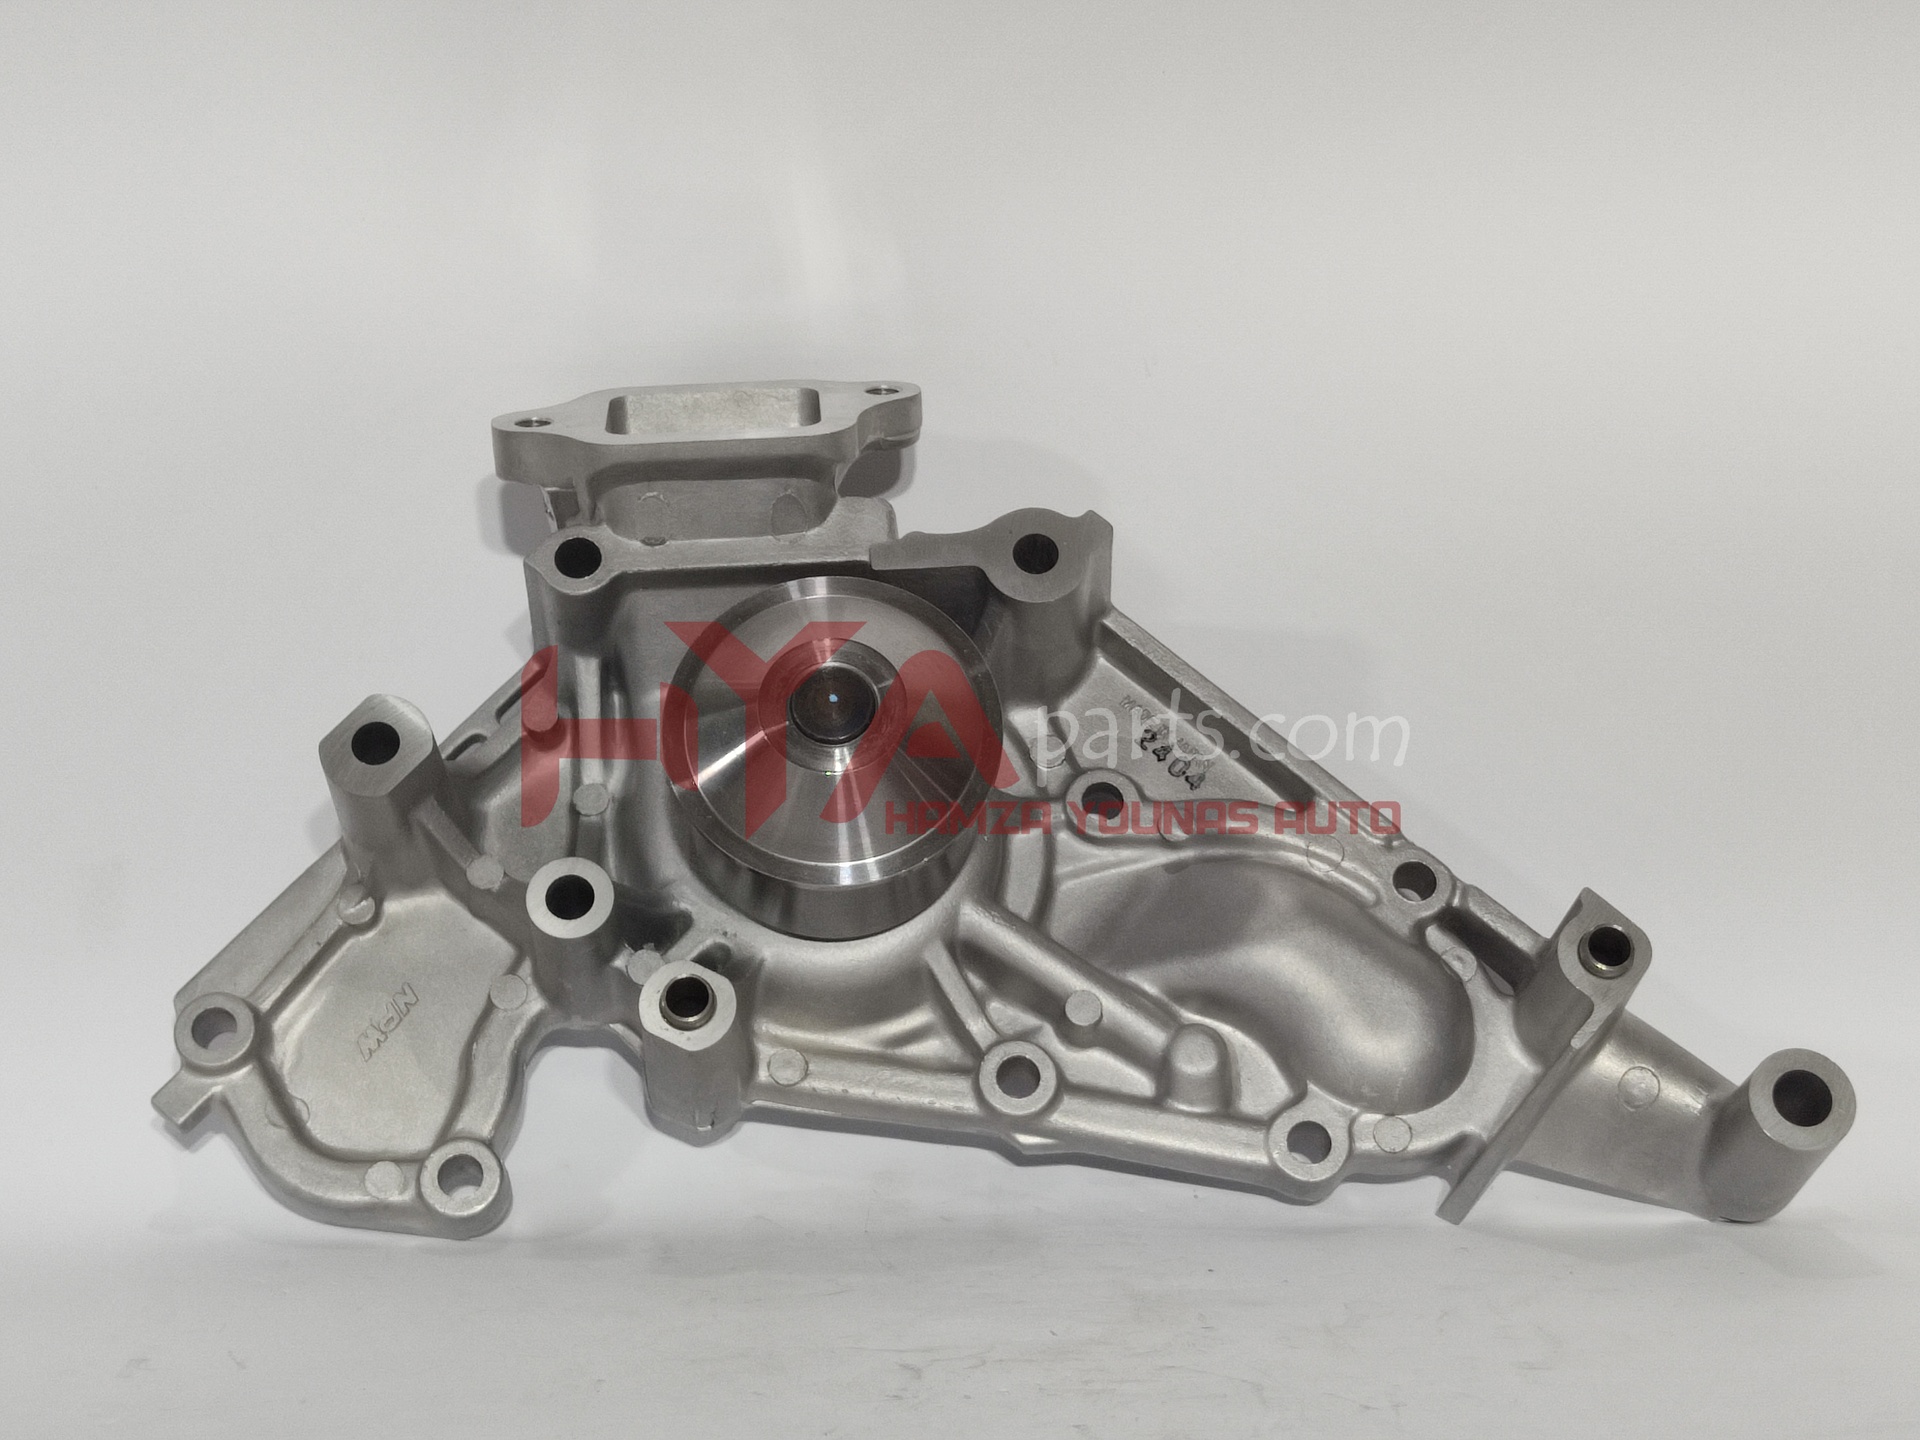 [NPW T-131] PUMP ASSY, ENGINE WATER (WATER BODY)